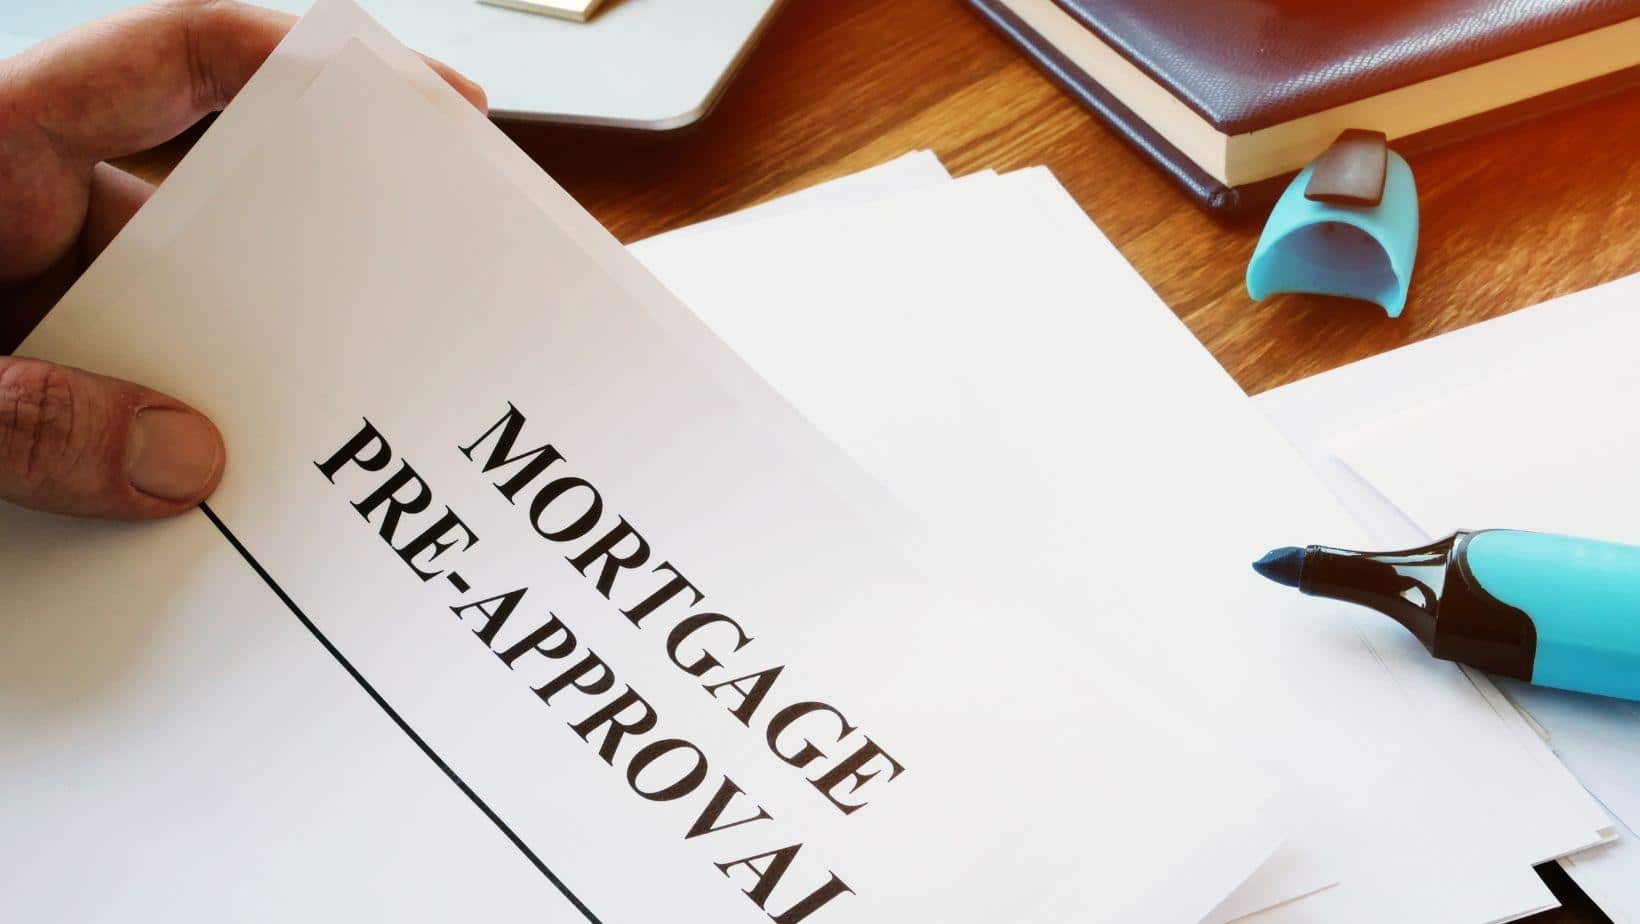 What Documentation Do You Submit For Mortgage Pre-Approval?